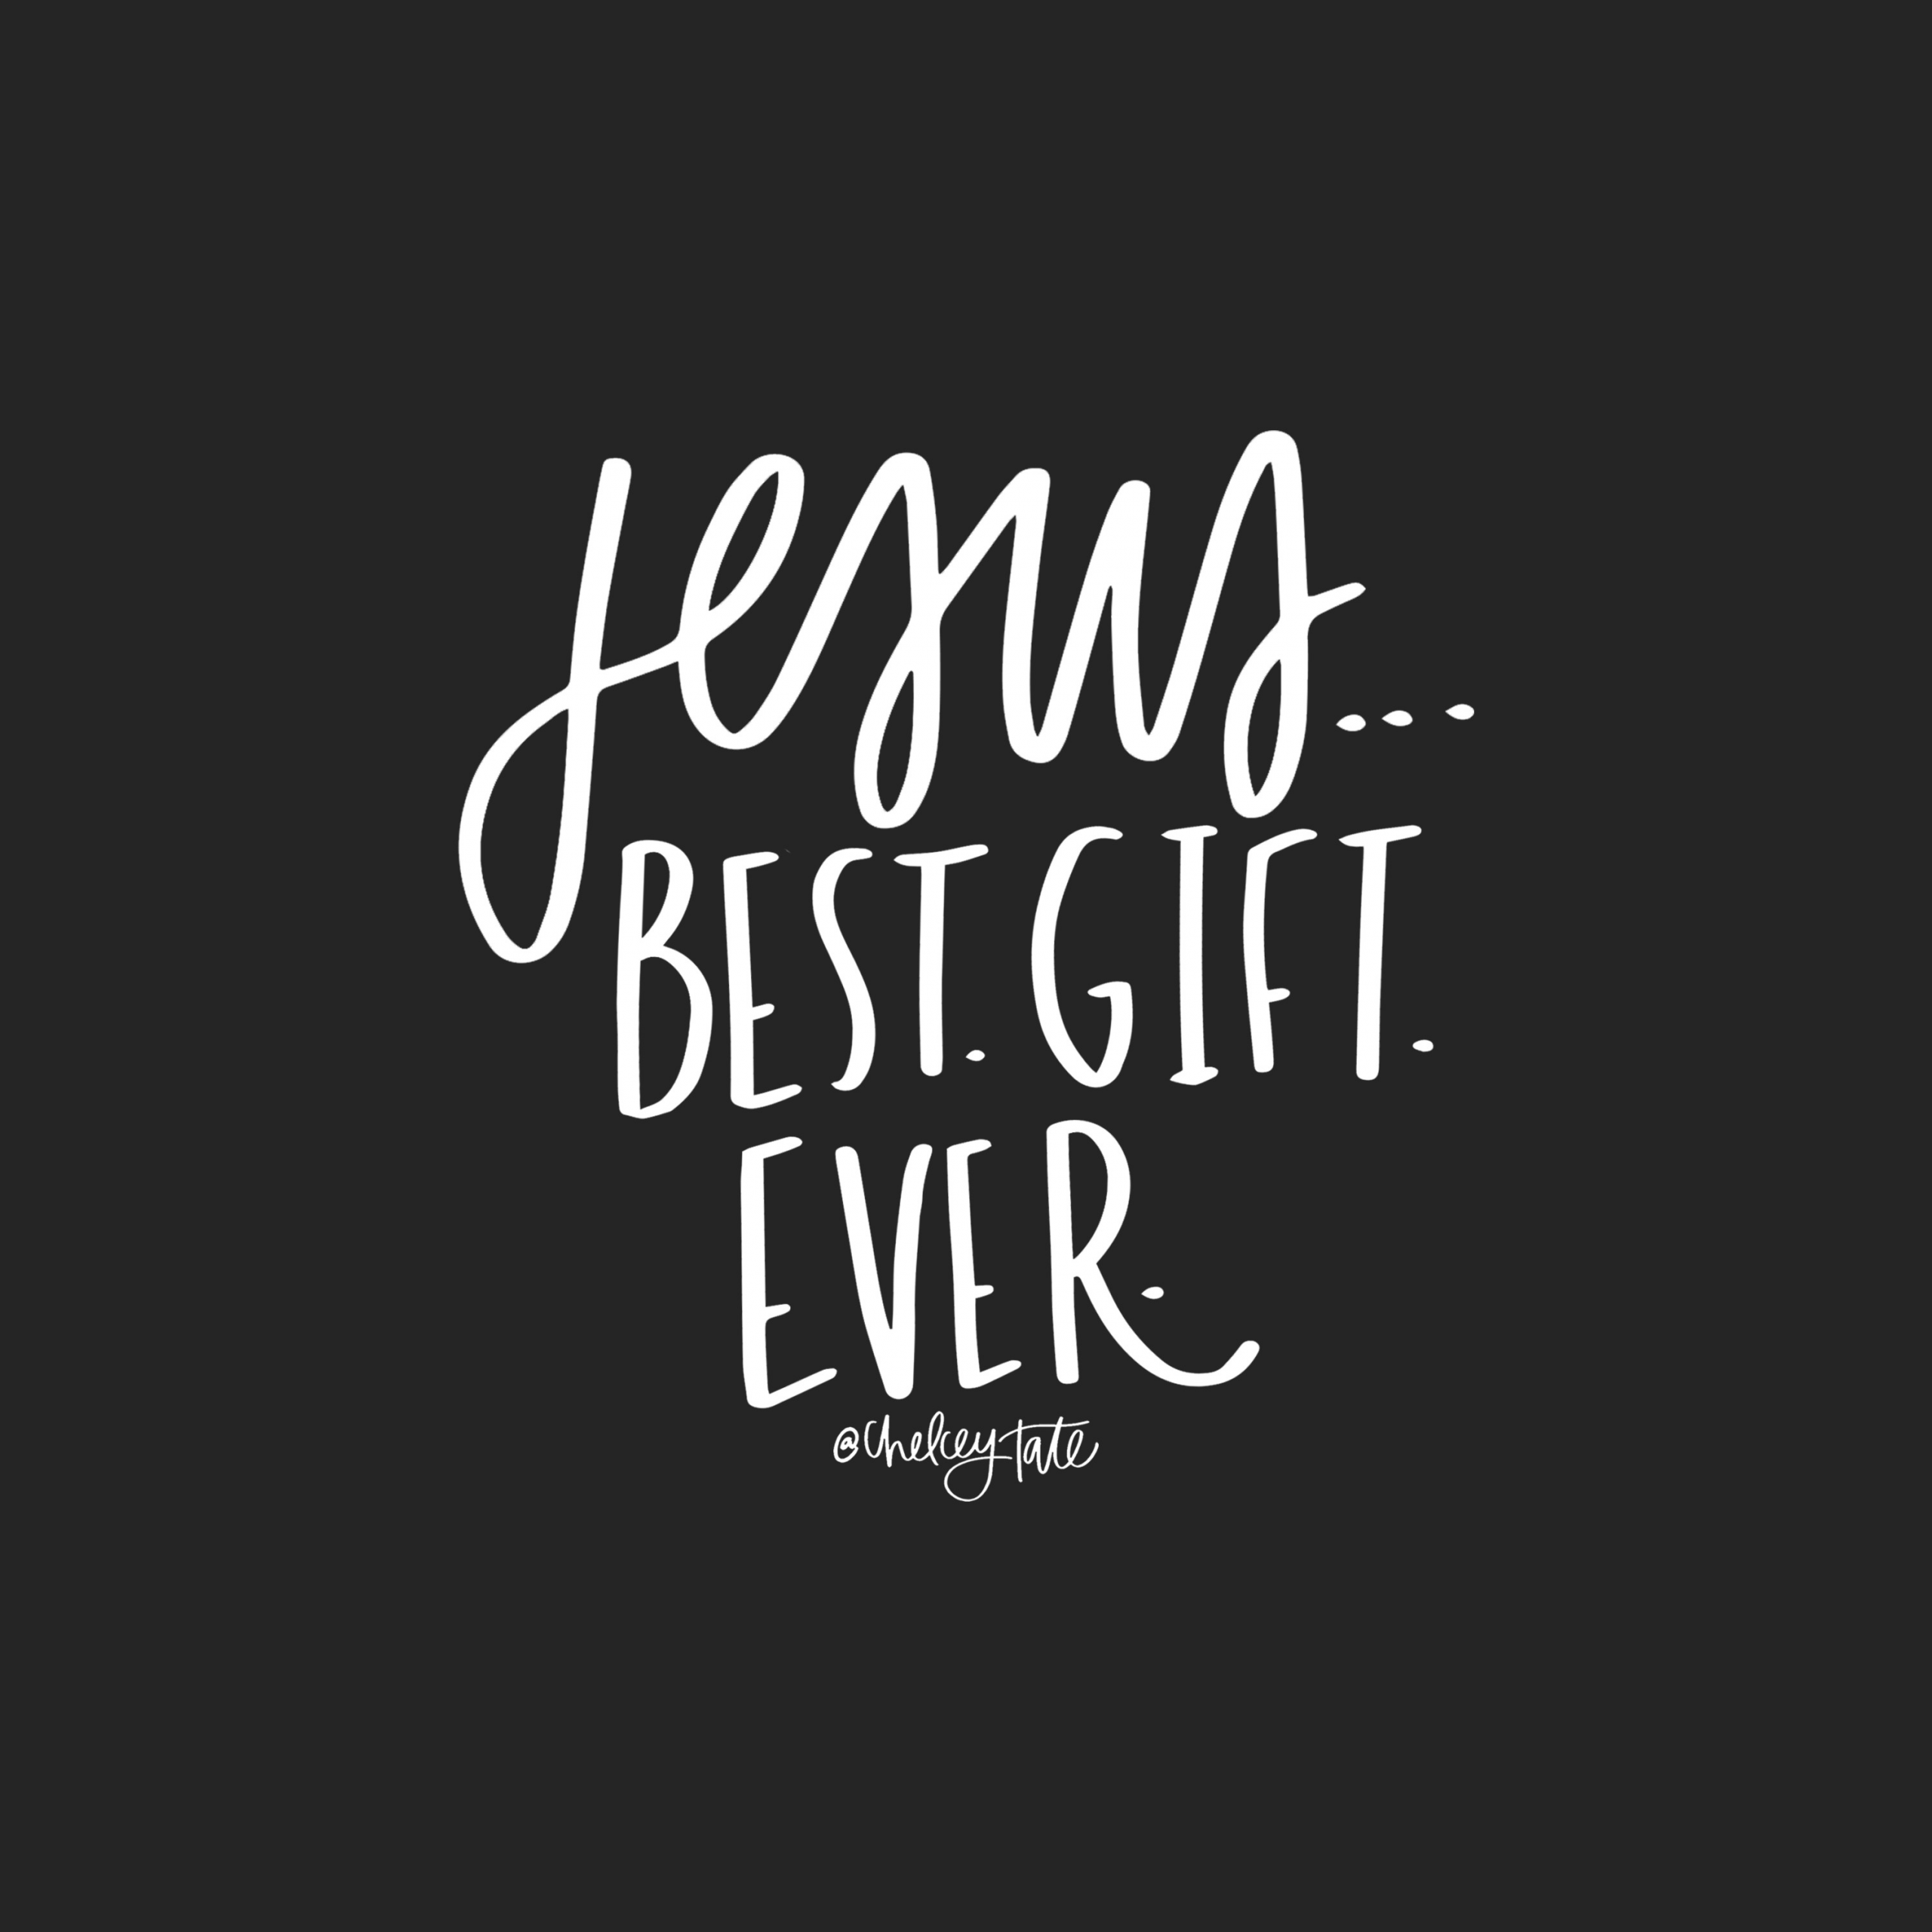 Christmas Quote Christian
 Jesus Best Gift Ever Christian Christmas quote